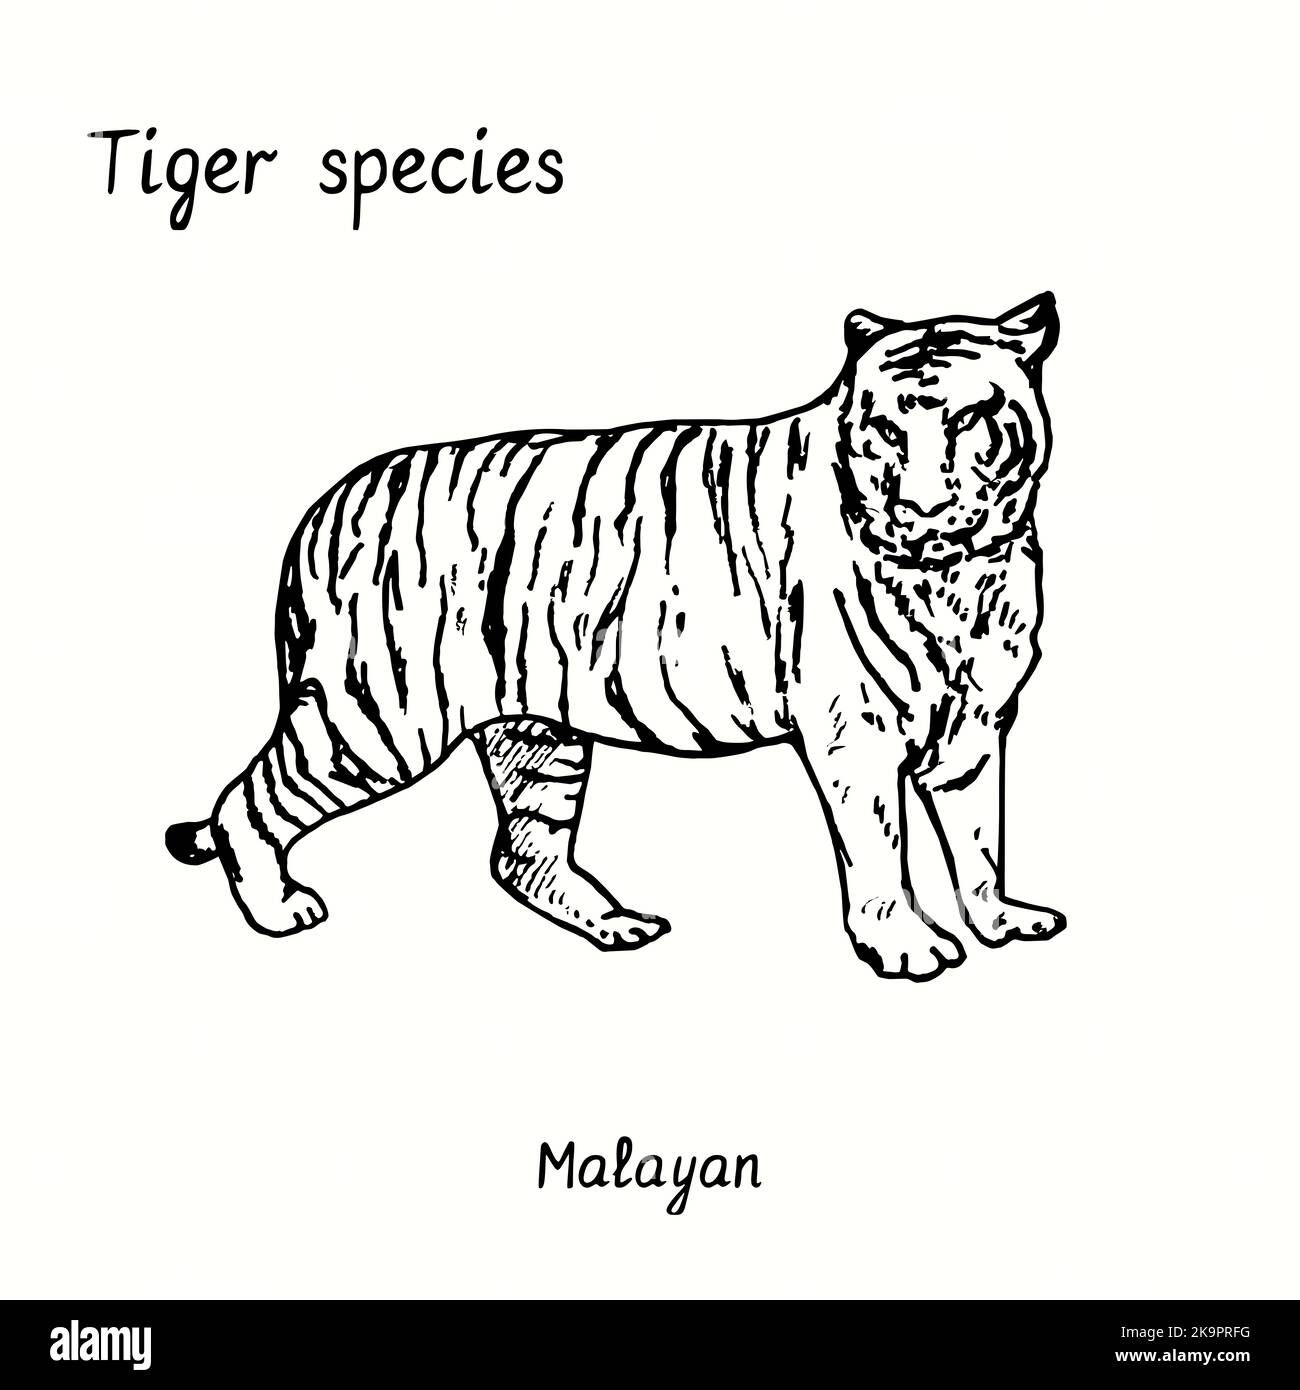 Tiger species collection, standing side view, Malayan. Ink black and white doodle drawing. Stock Photo